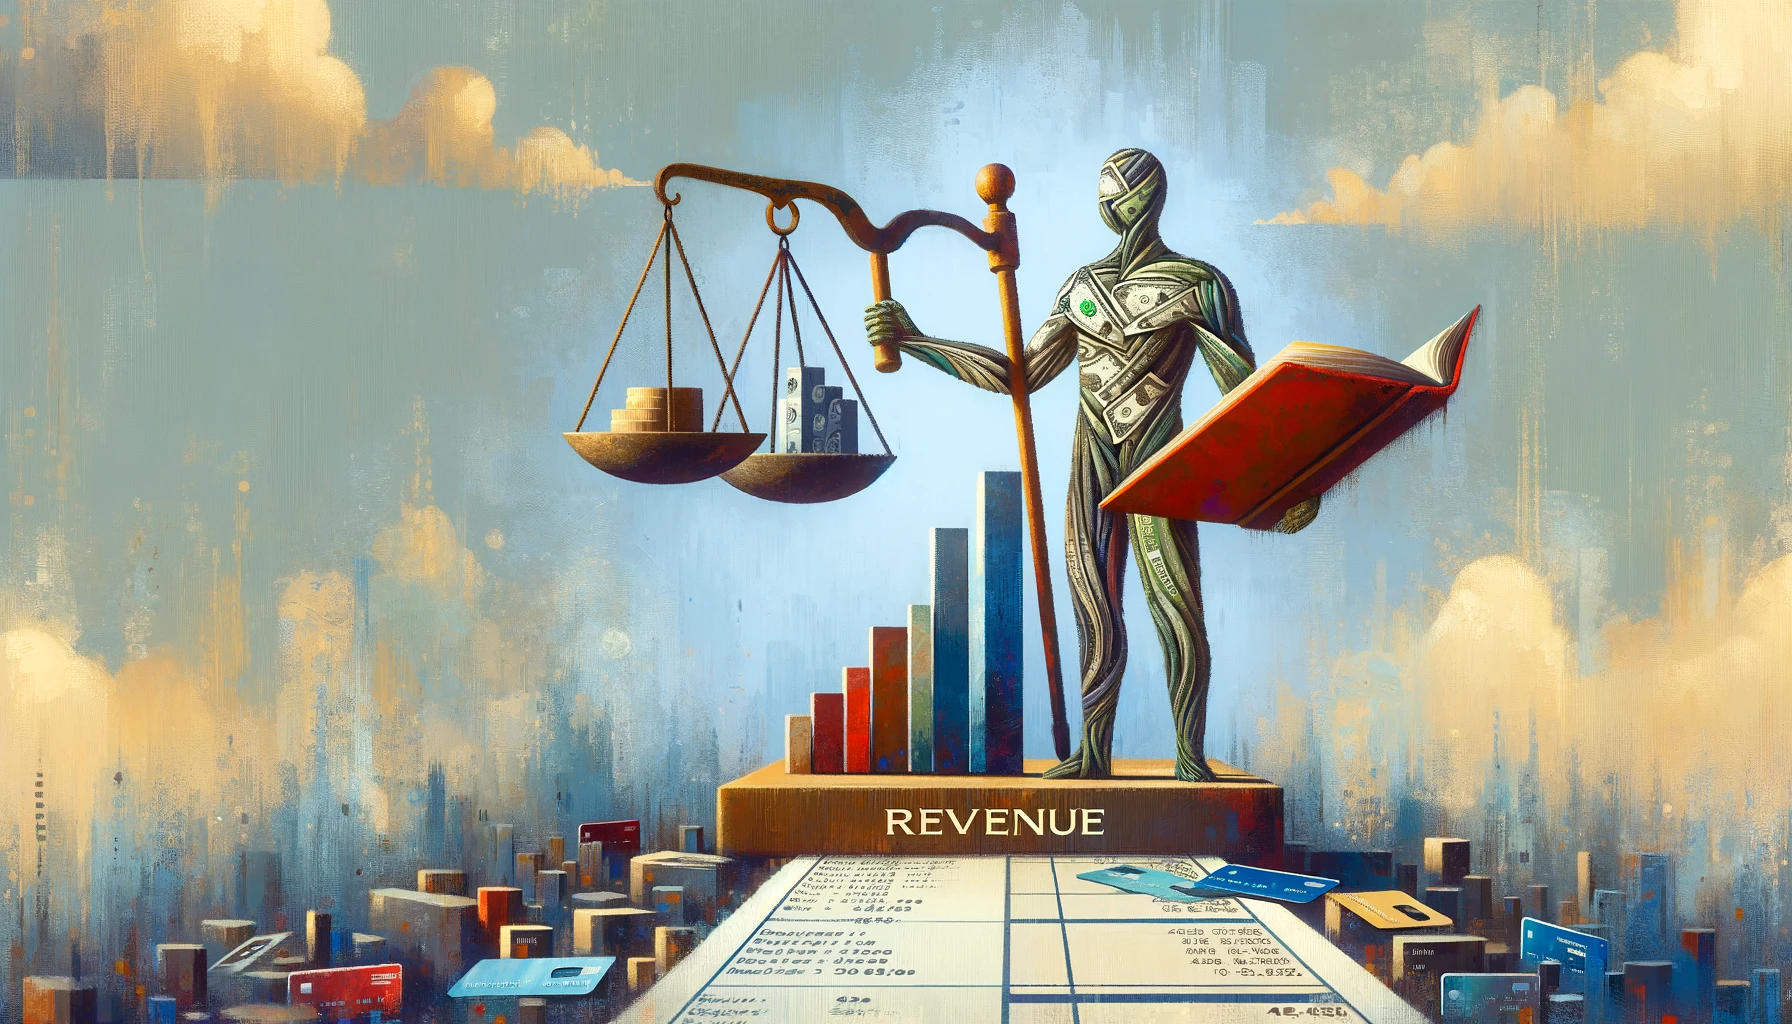 An abstract illustration that personifies the concept of revenue being credited. Imagine revenue as a character, depicted as a regal figure made of currency, holding a large ledger book. The character stands on a platform of credit cards and financial documents, with a balance scale in one hand, symbolizing the balancing act of revenues and expenses. This character oversees a bustling marketplace of businesses and consumers below, representing the economy's flow of money and the role of revenue in financial statements.